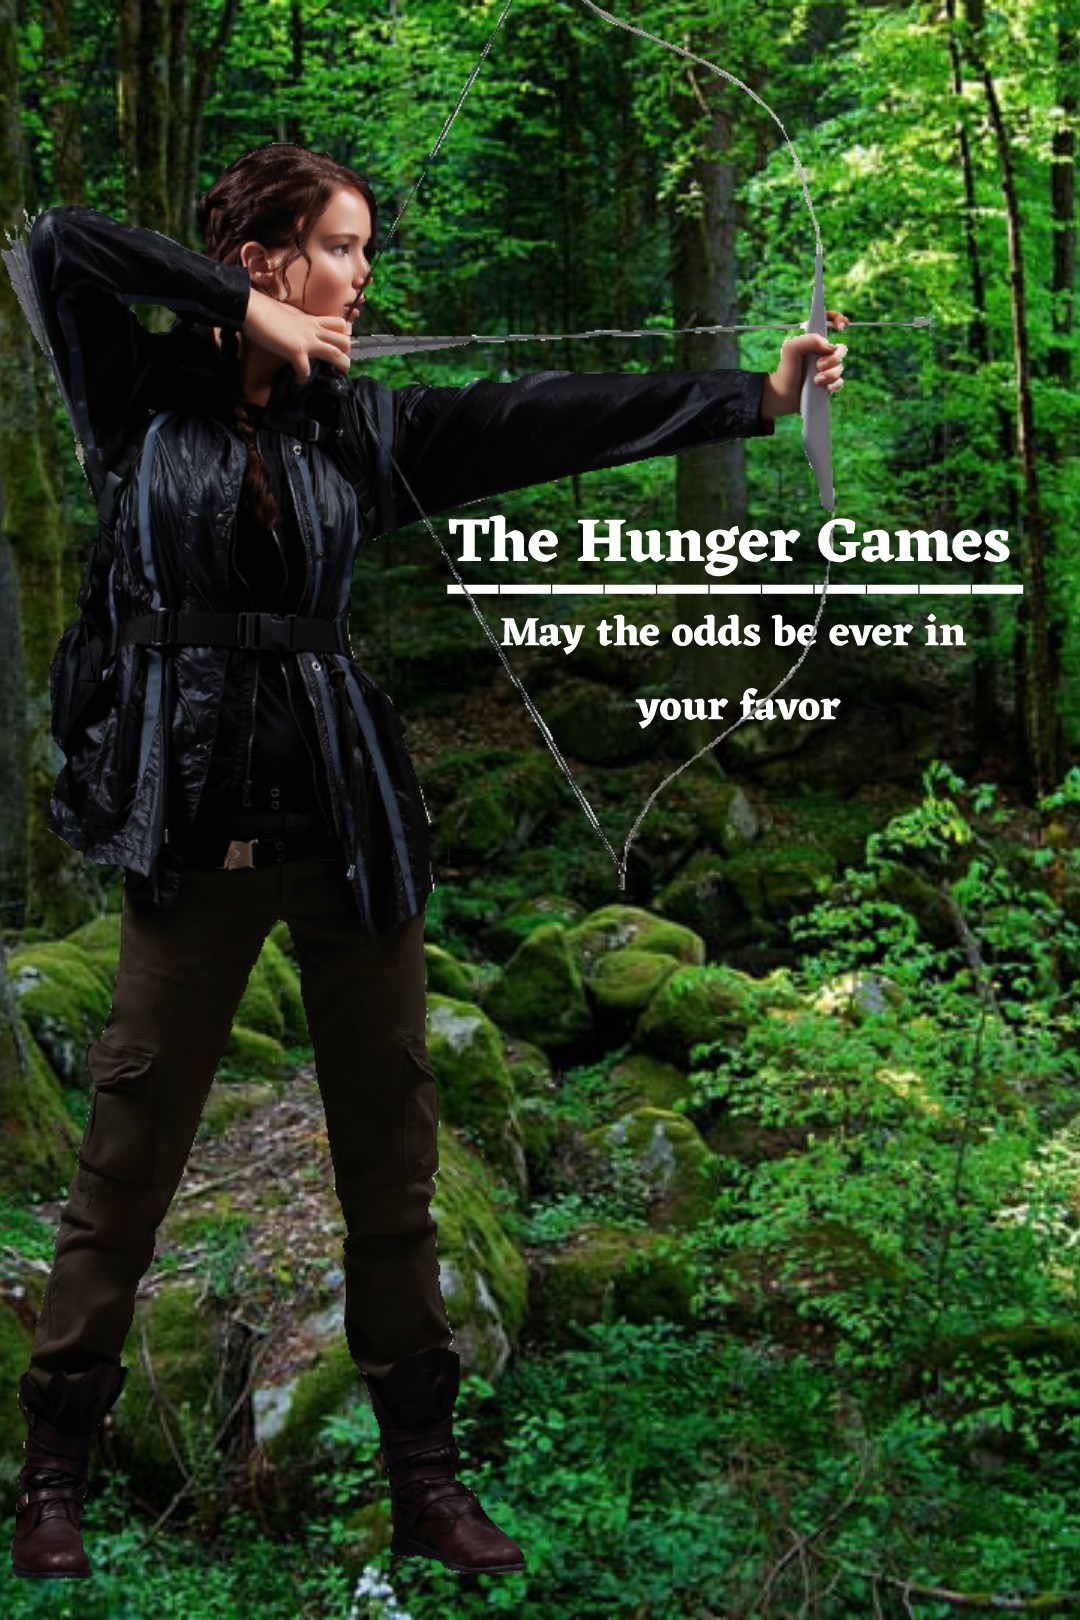 🏹Tap🏹

Hey guys! I'm sorry I havent posted in a while. I decided to switch up my post for today. I will go back to Harry Potter very soon! The collages are taking a while. I decided to switch it up to Katniss Everdeen. Hope you guys are well!🏹❤❤❤